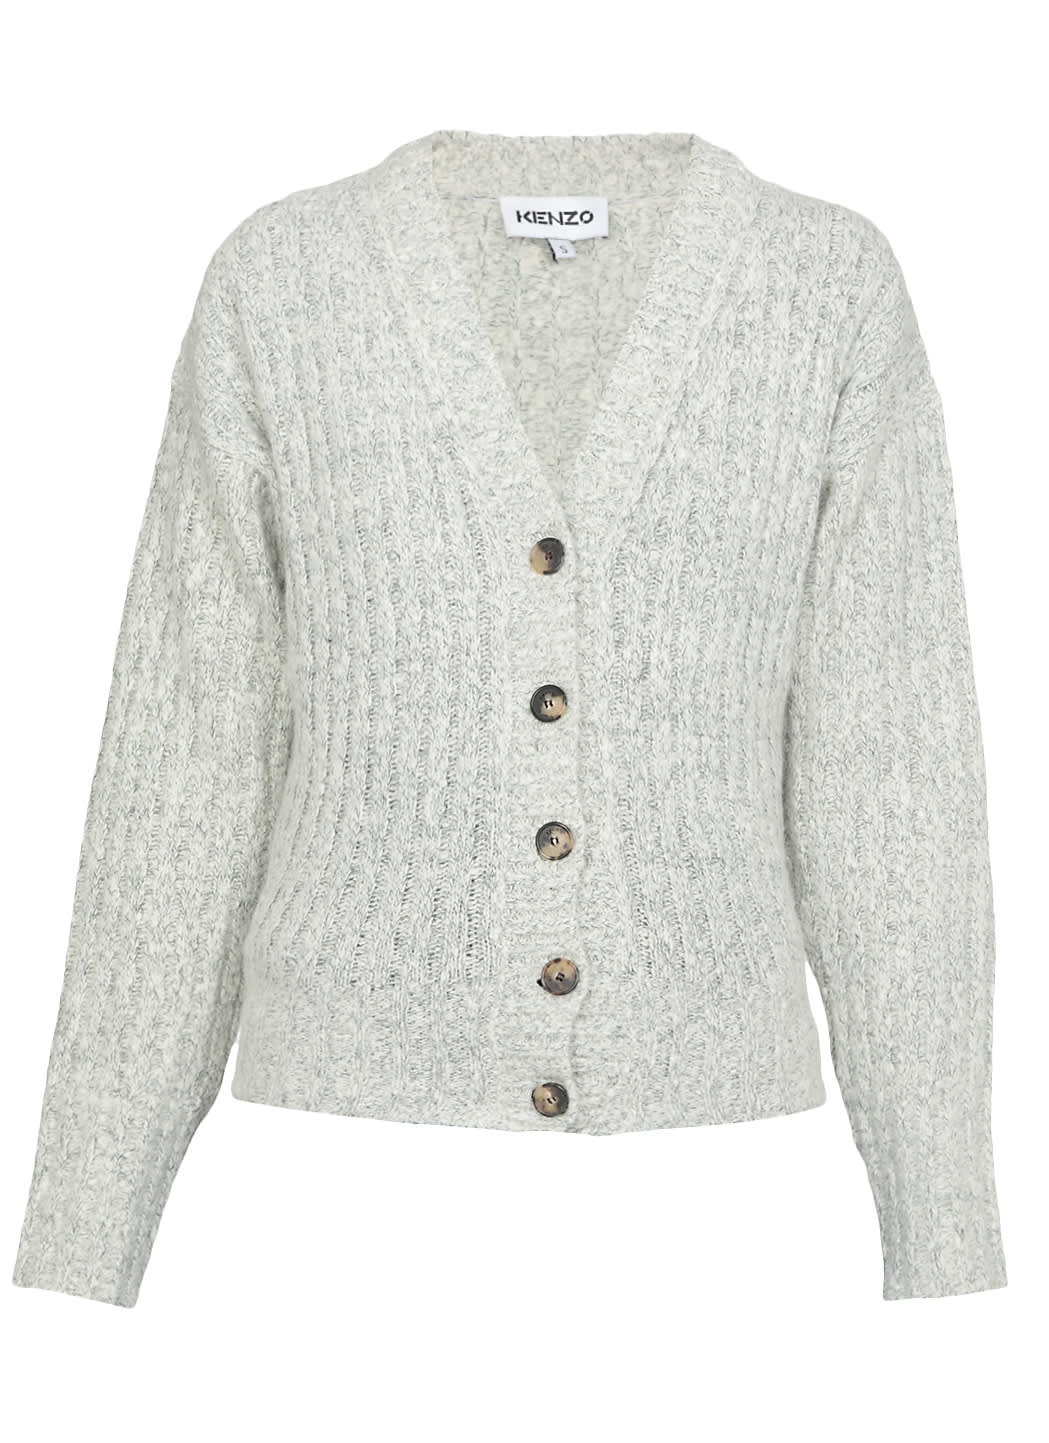 Kenzo Wool And Cashmere Knitted Cardigan